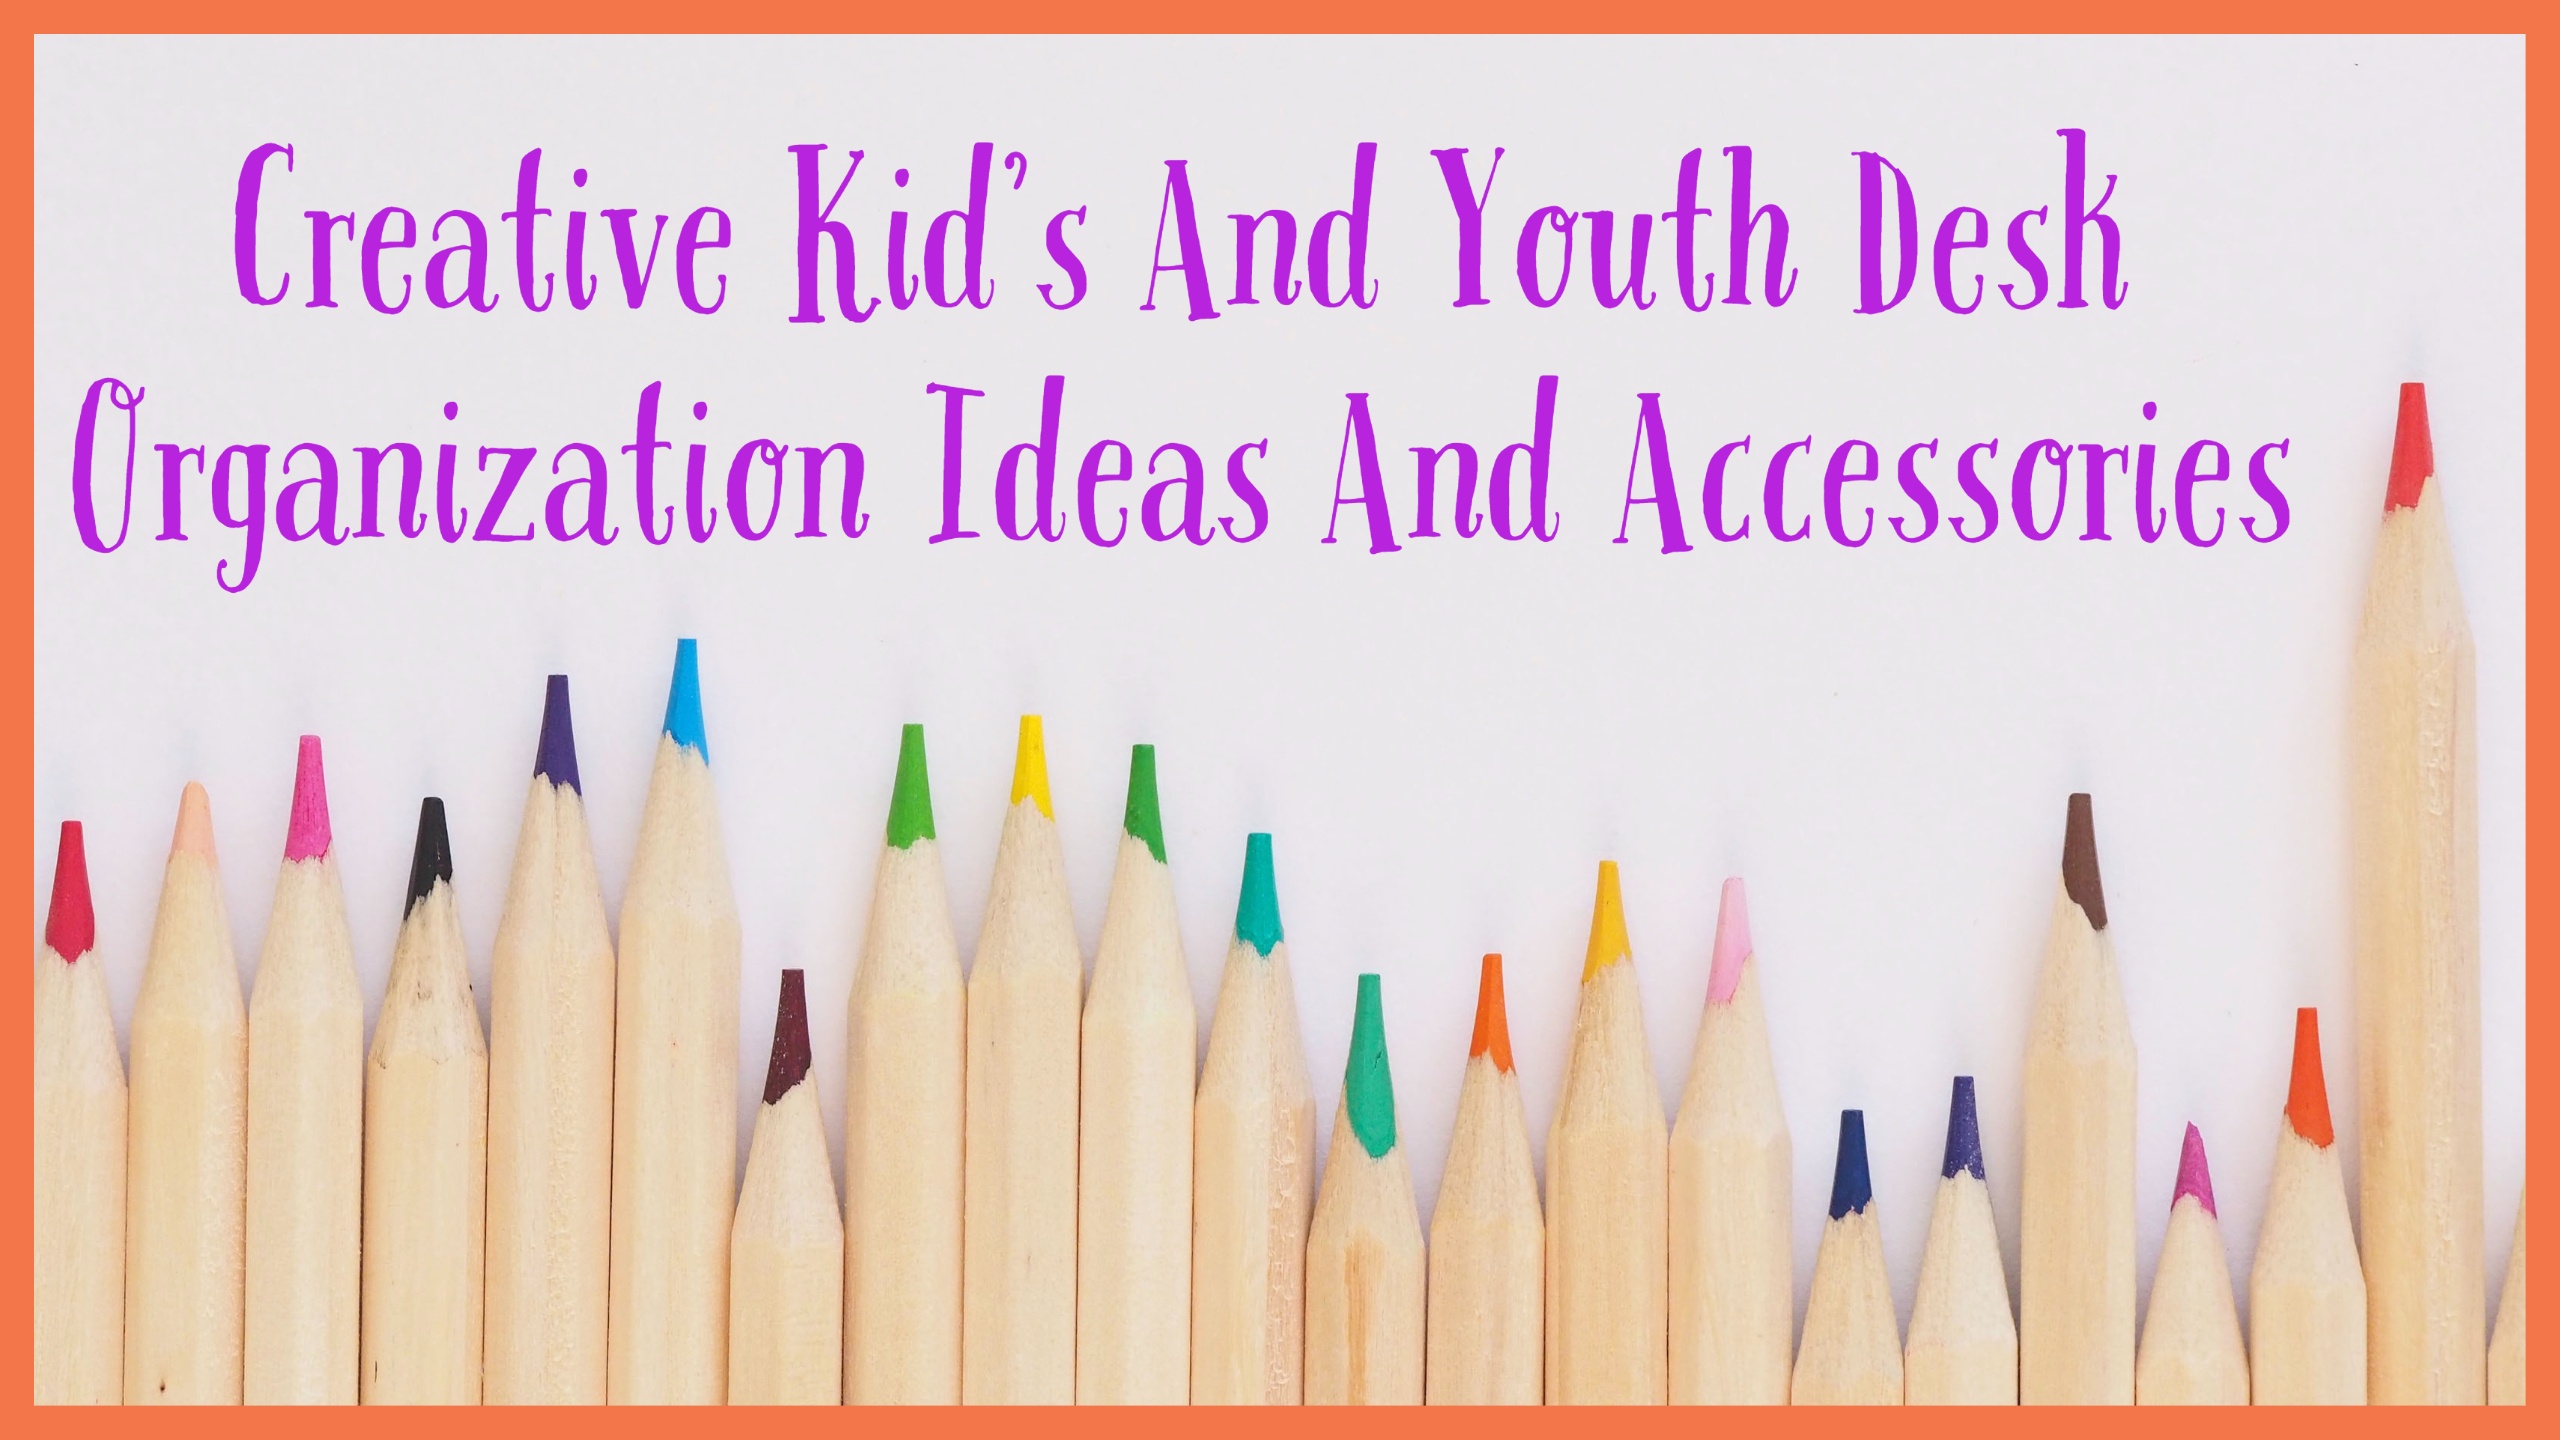 Creative Kid's And Youth Desk Organization Ideas And Accessories